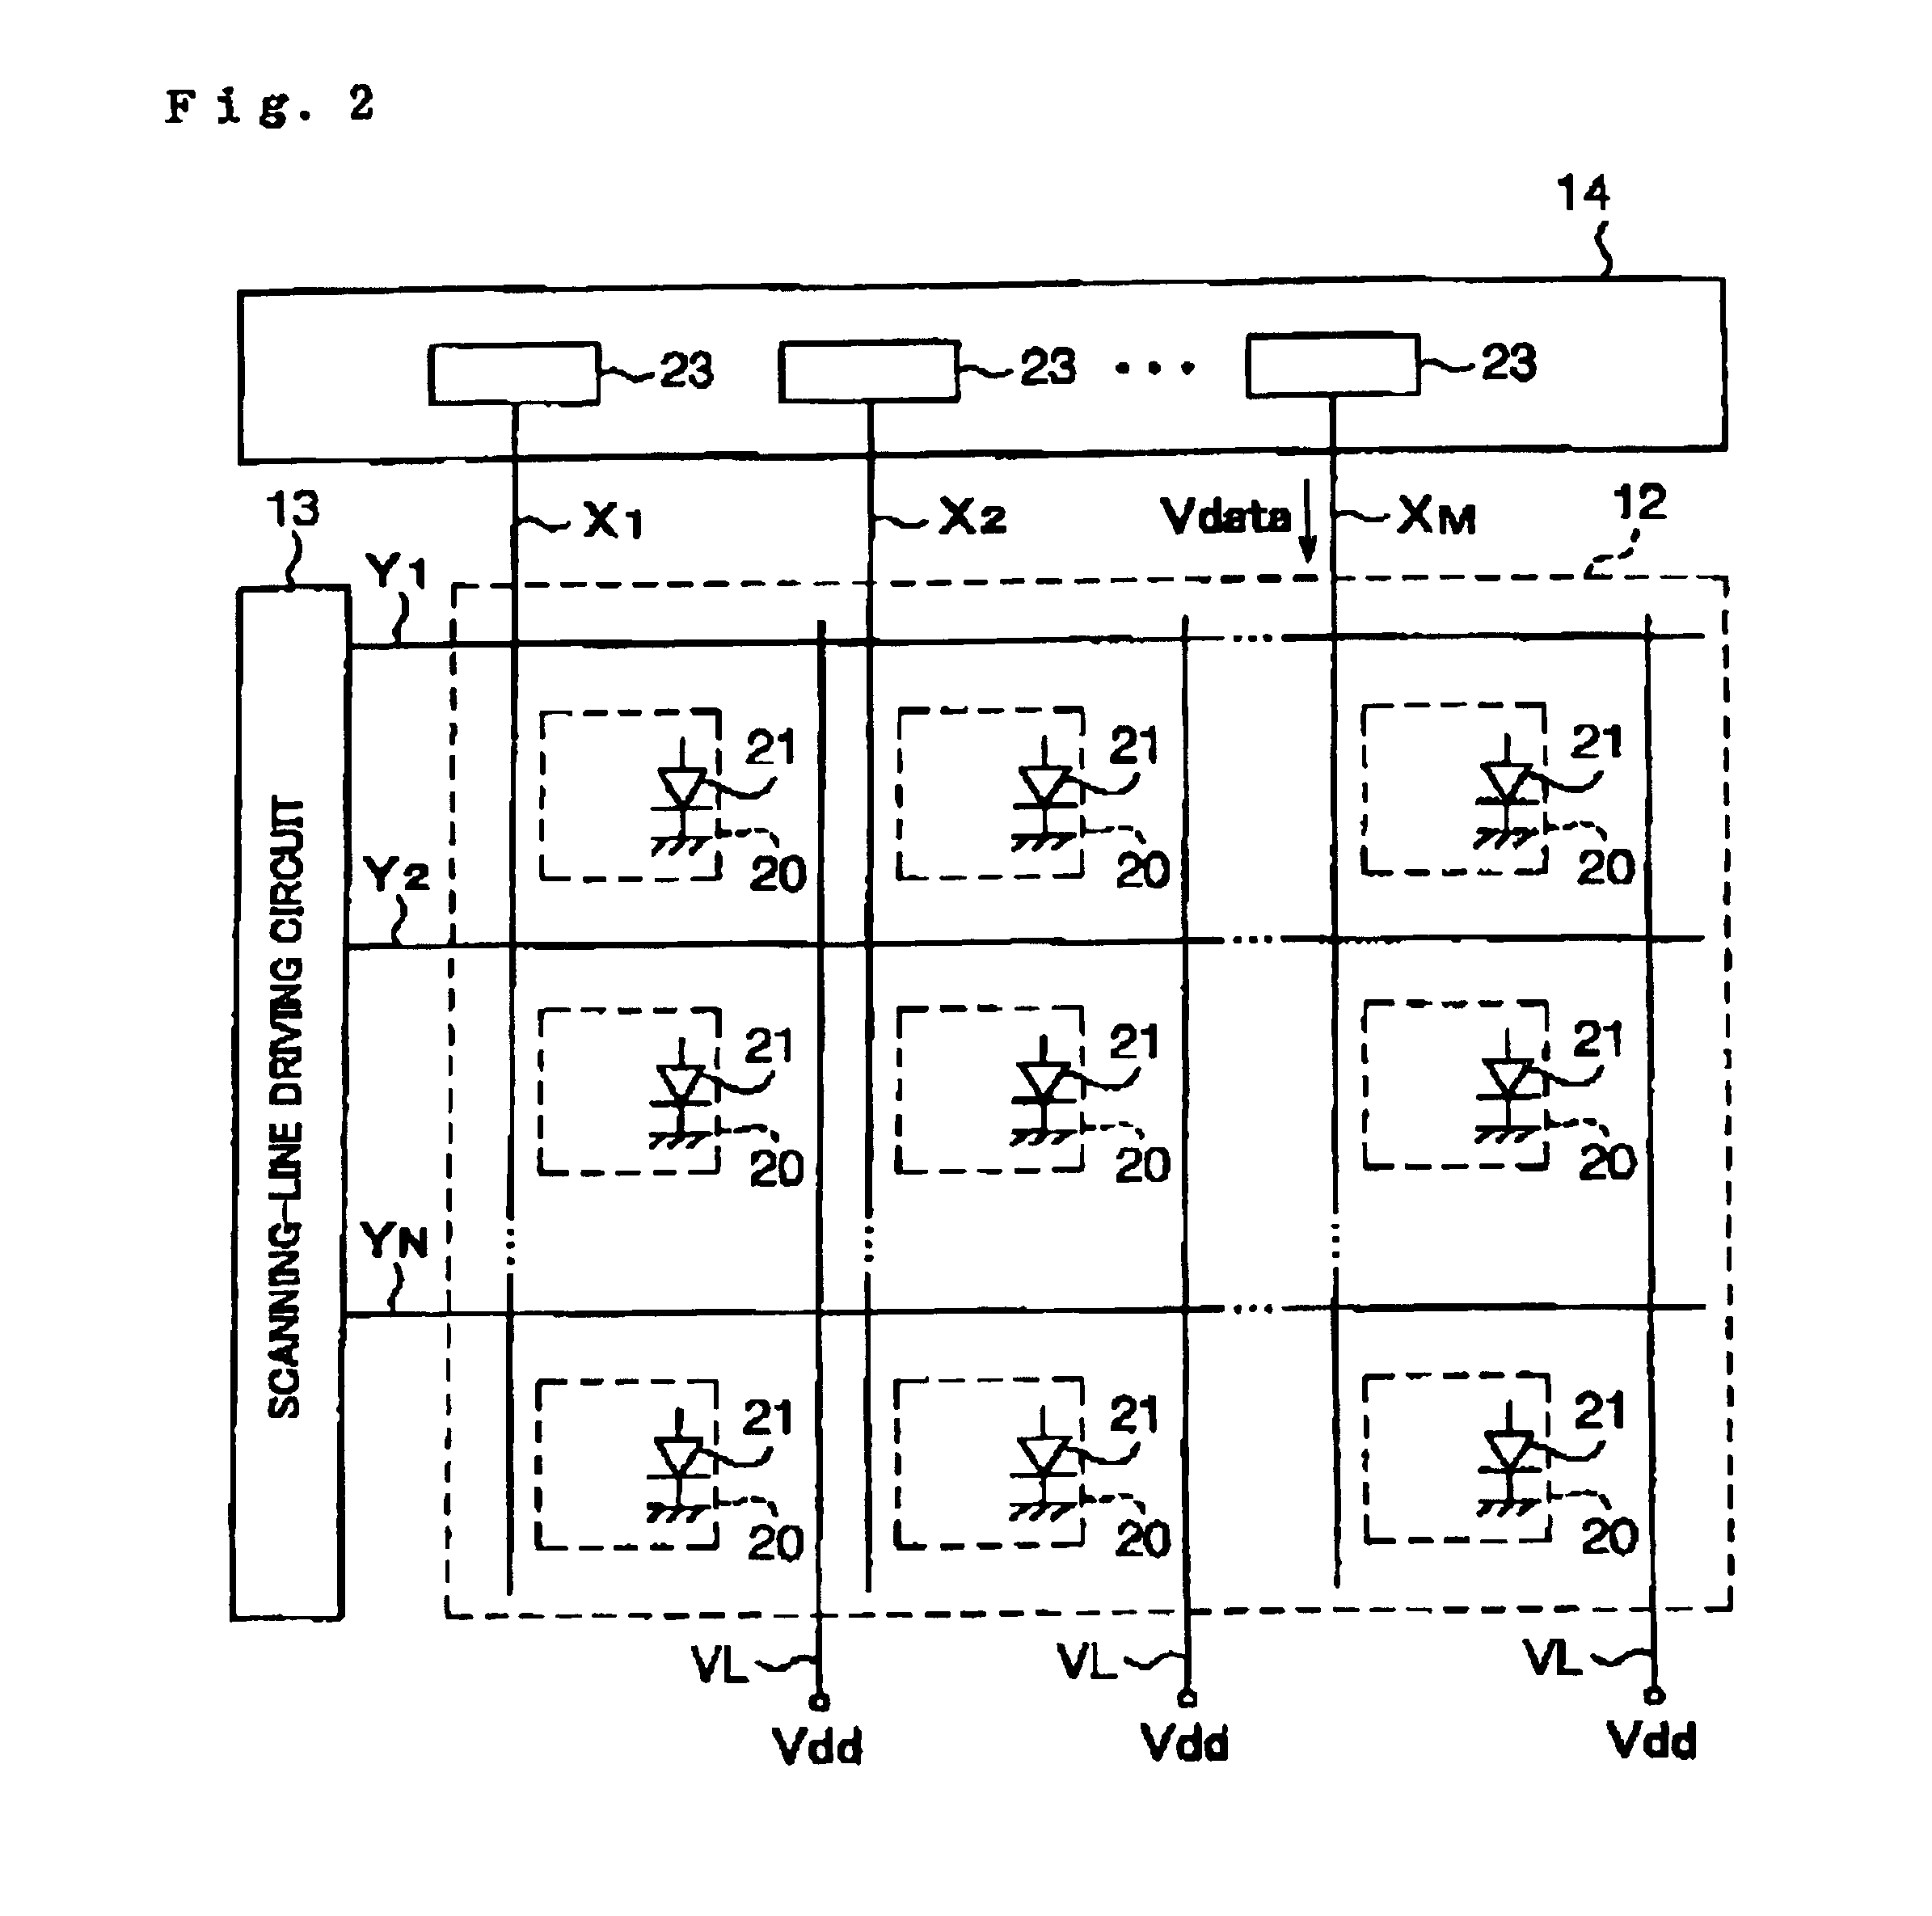 System and methods for driving an electro-optical device